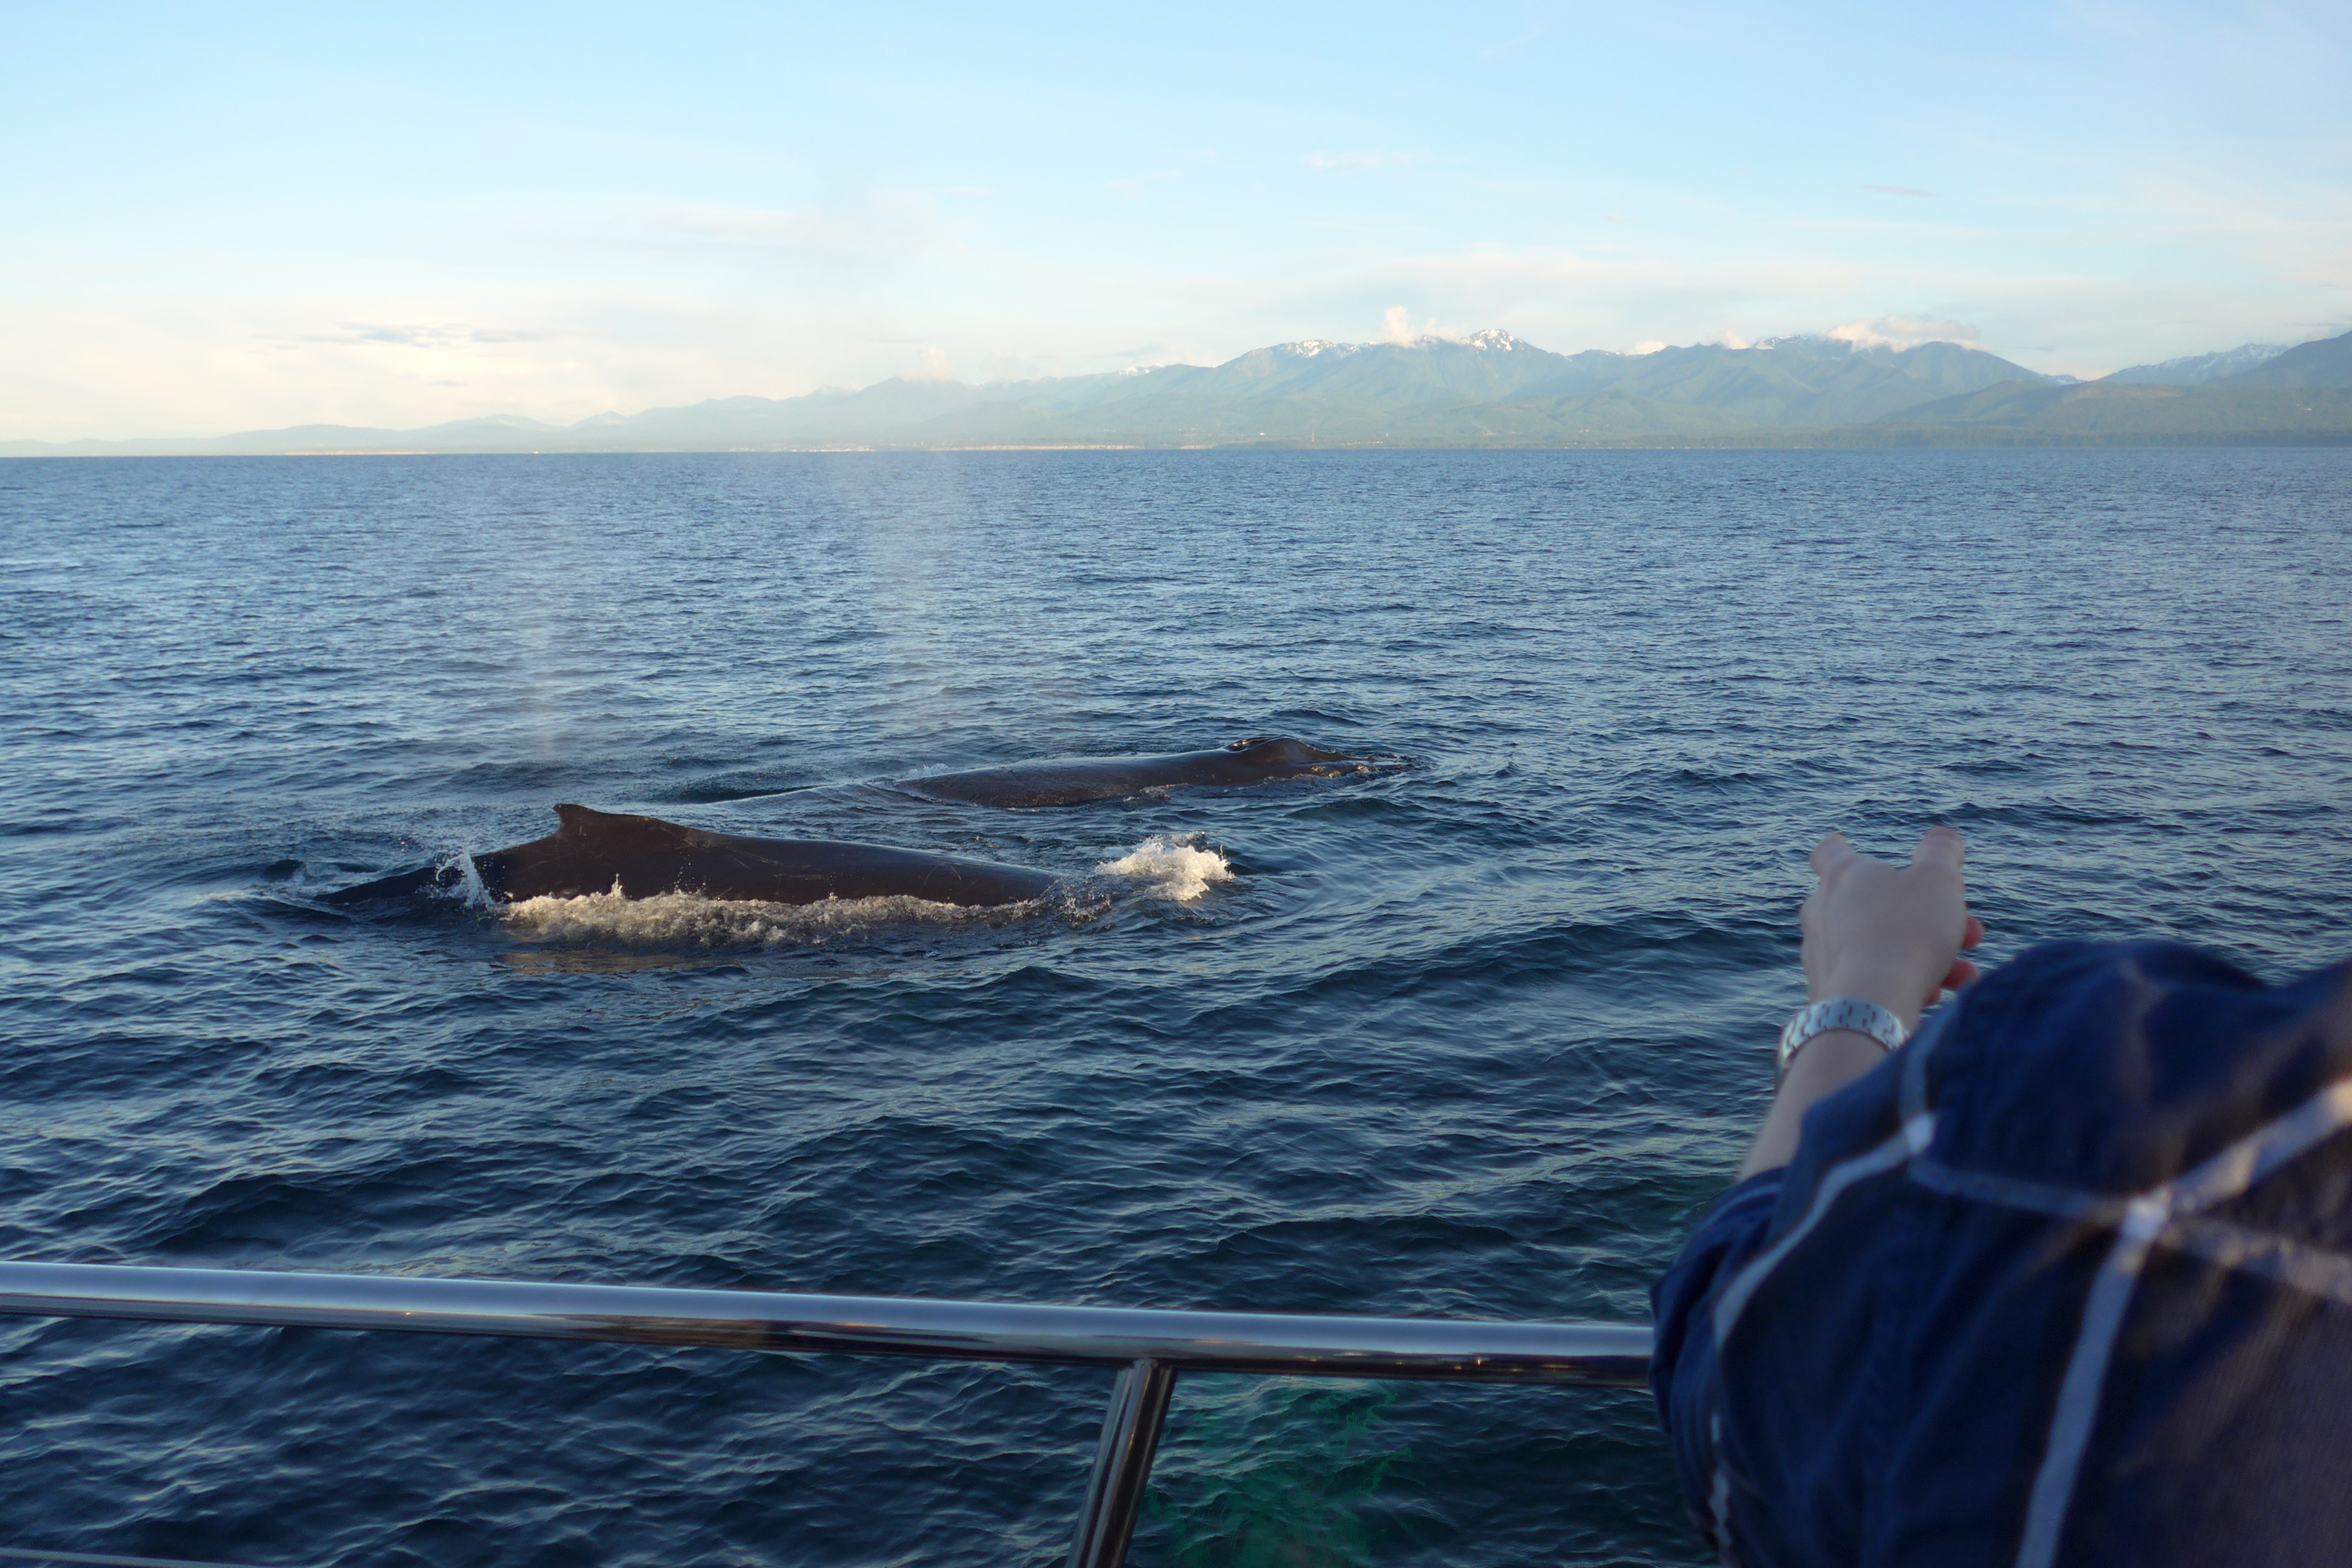 Whales up close in Victoria BC